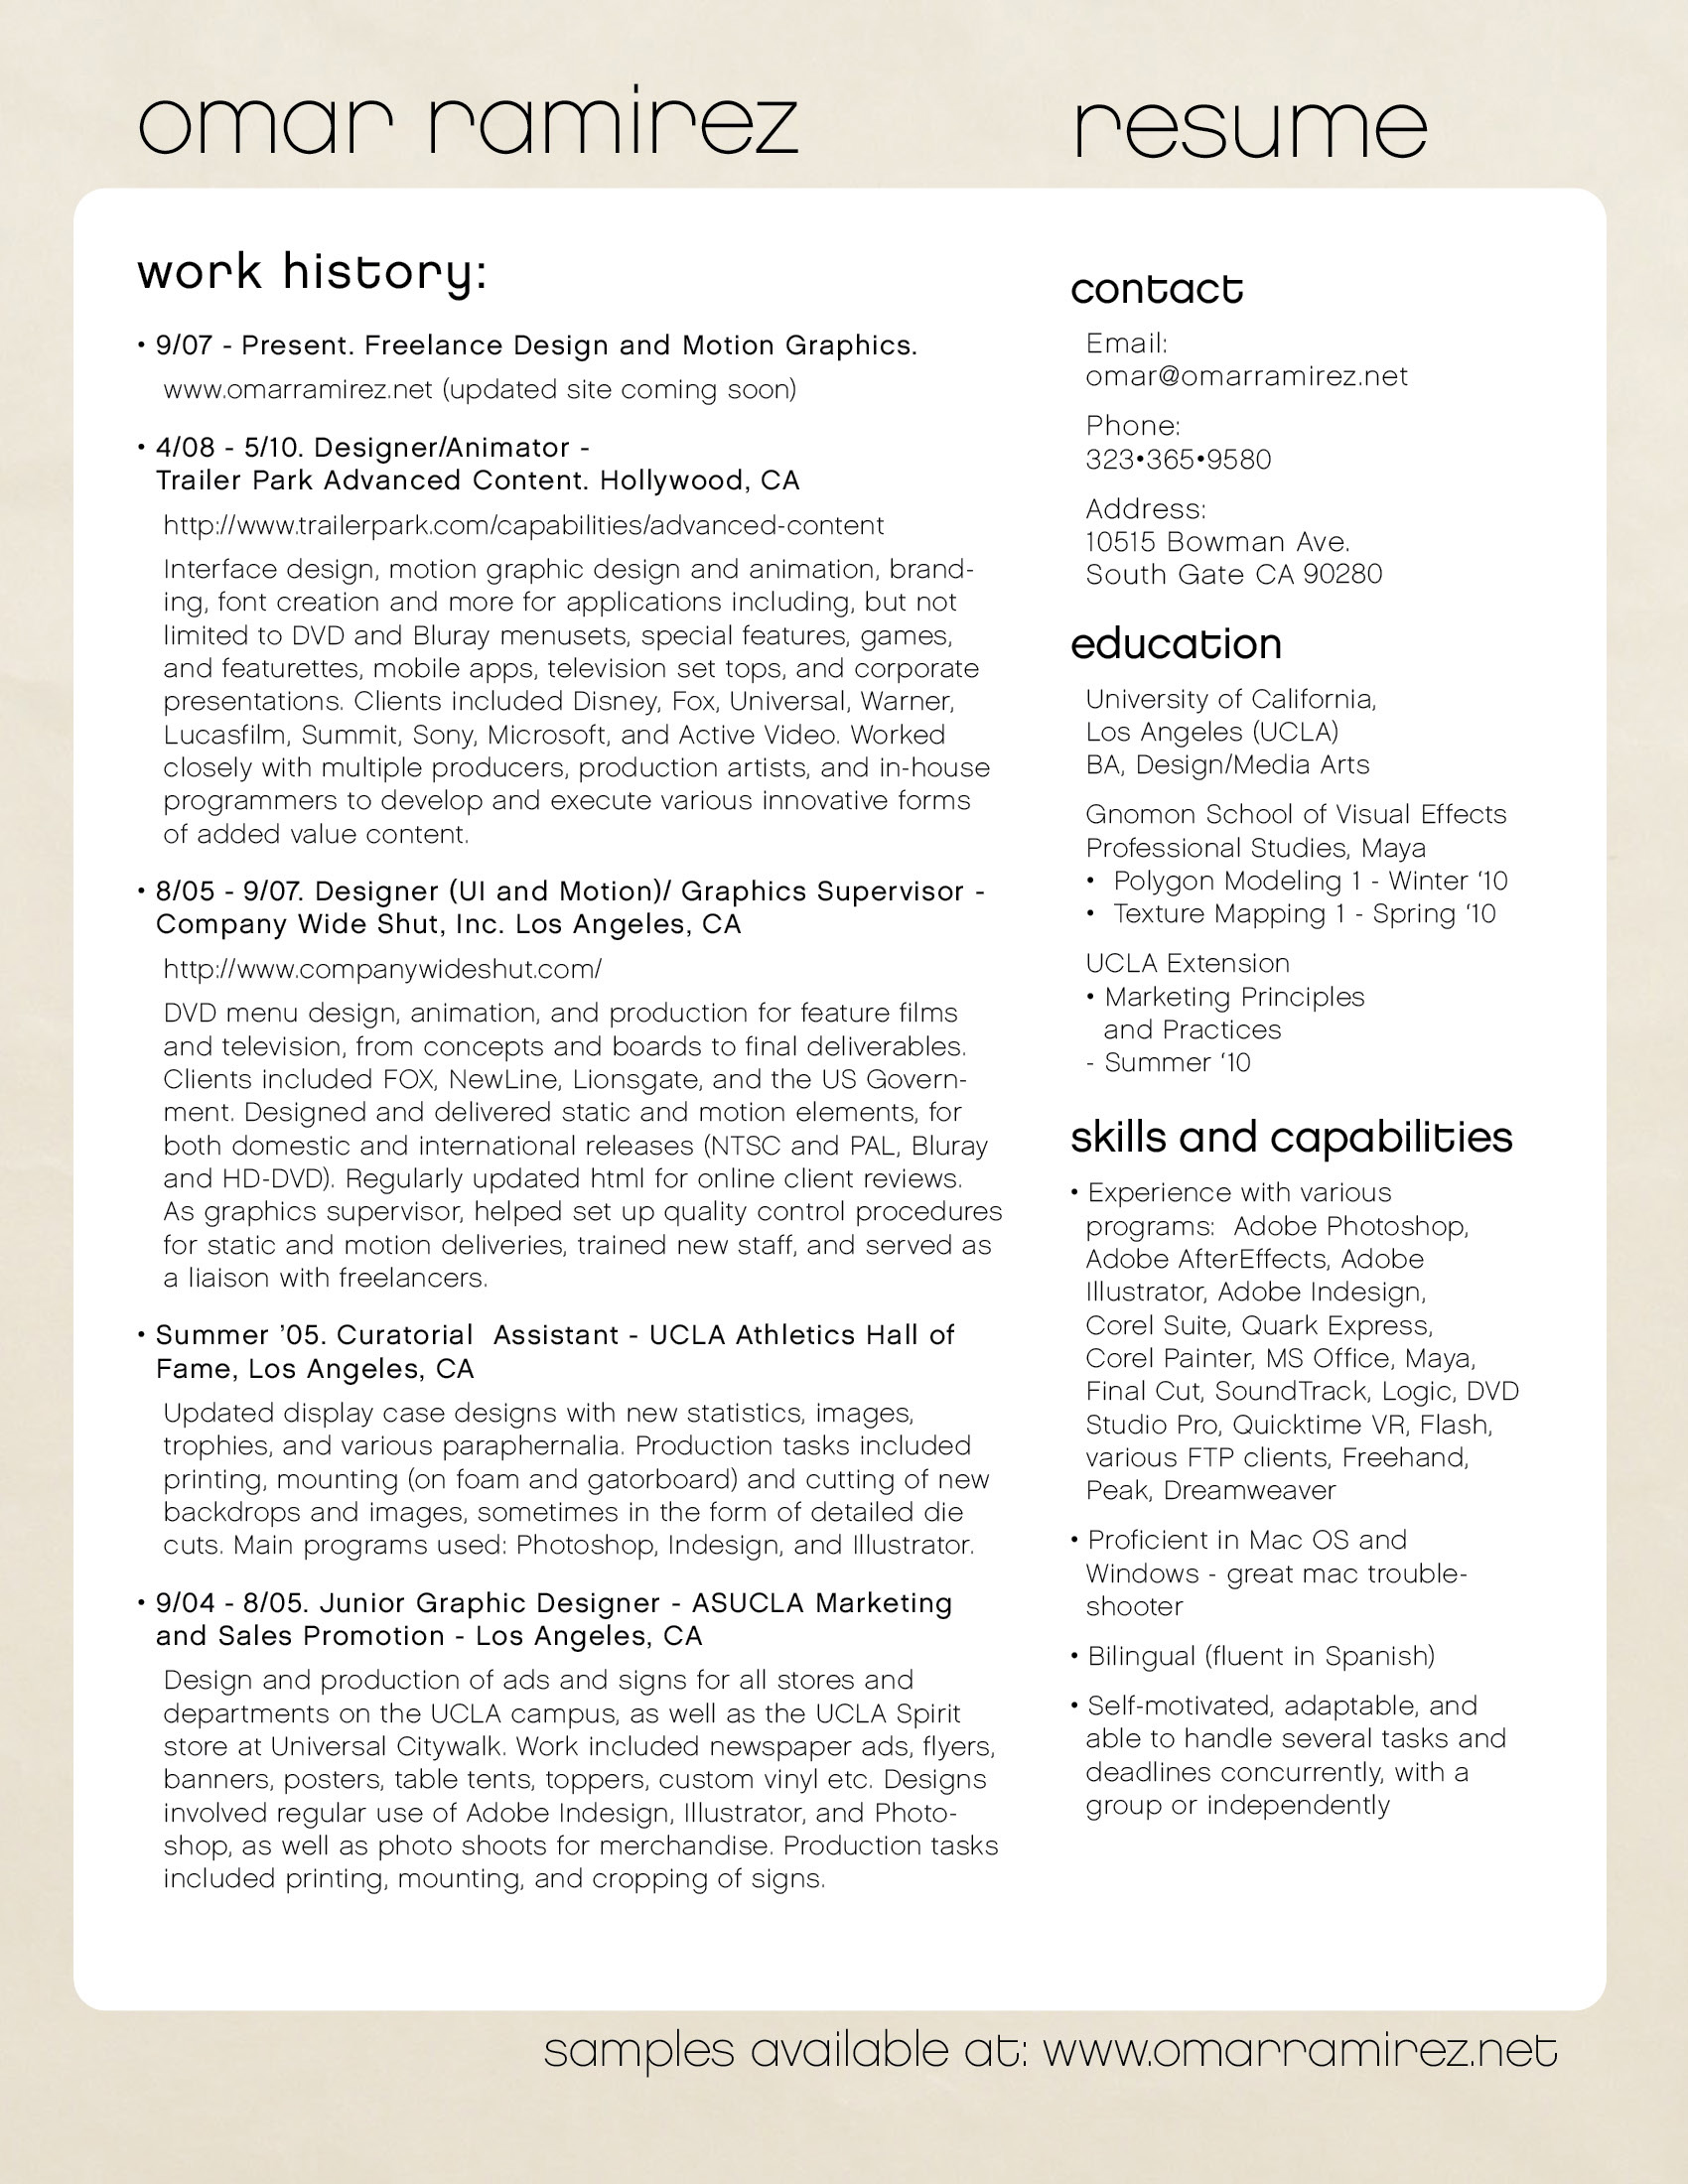 Resume_page1